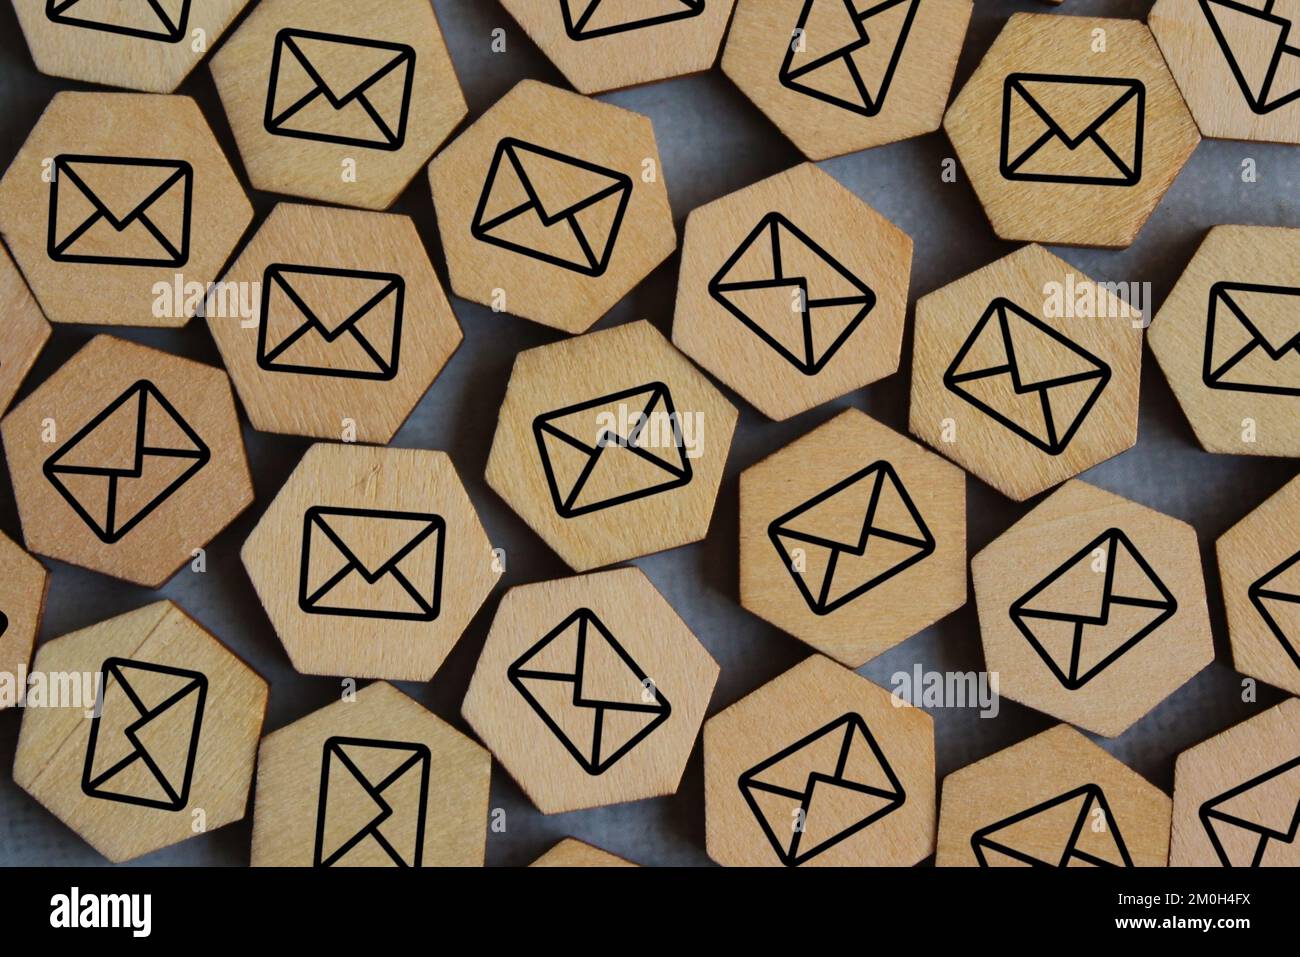 Top view image of wooden cubes with mail icon. Junk email, spam mail and email overload concept Stock Photo